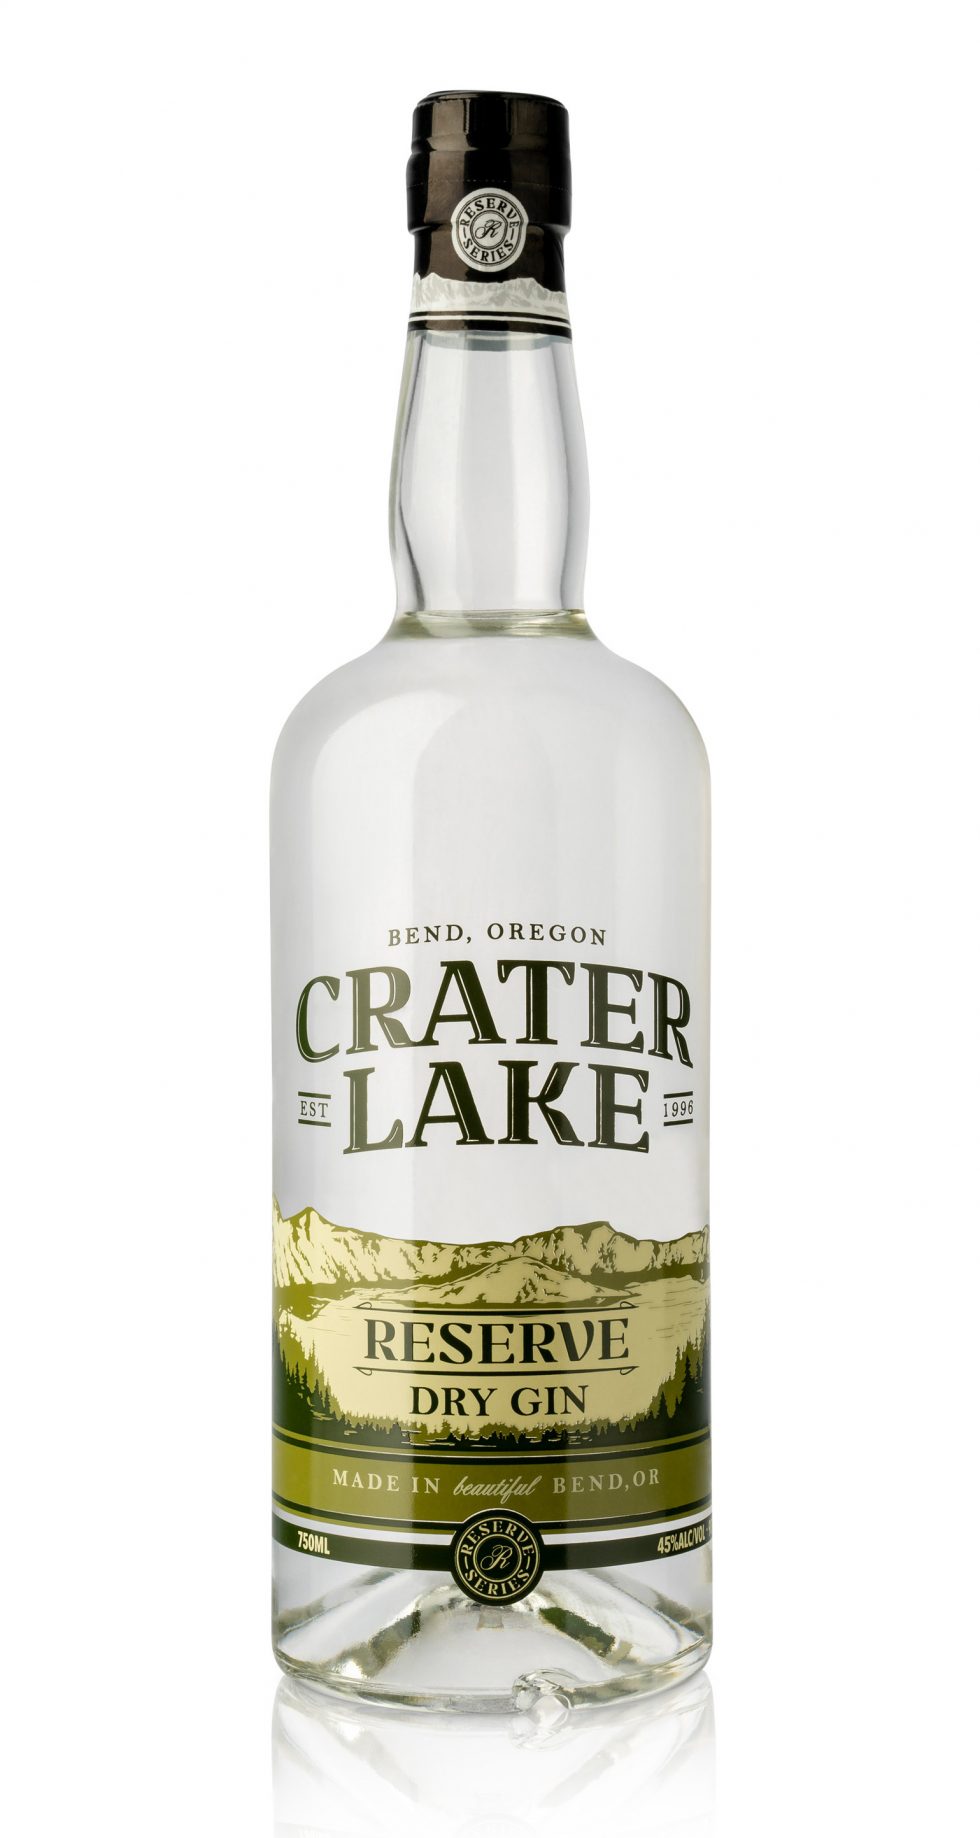 Crater Lake Reserve Dry Gin